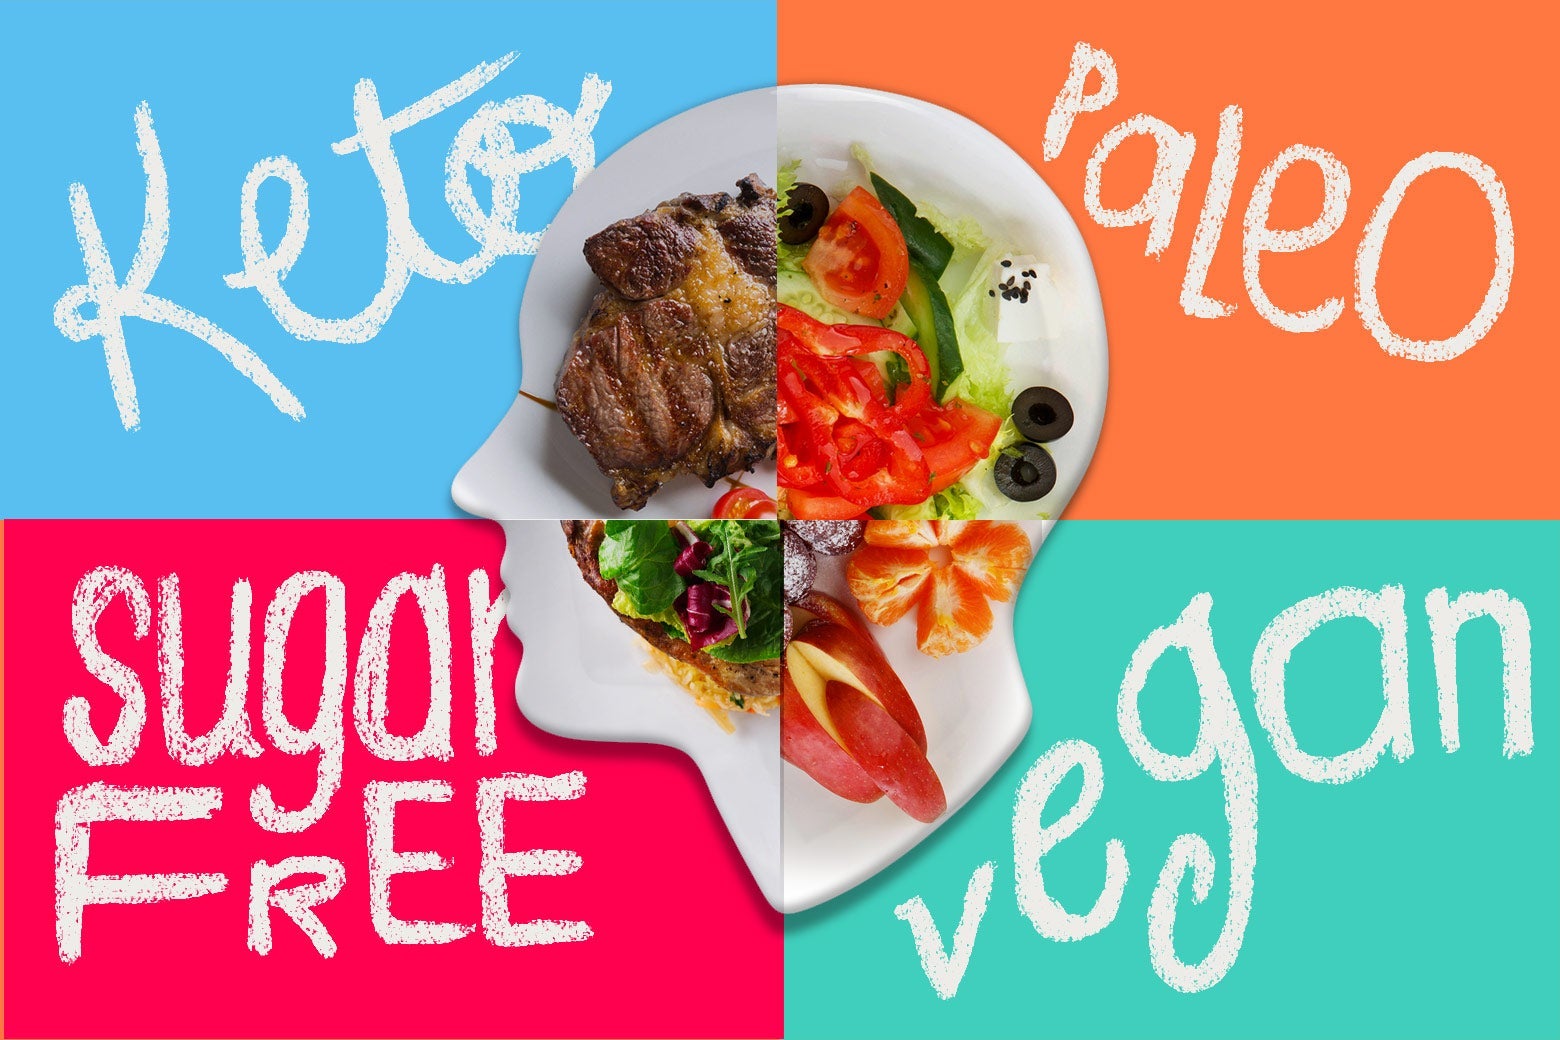 Collage of a plate with foods for specific diets: paleo, keto, sugar-free, vegan.